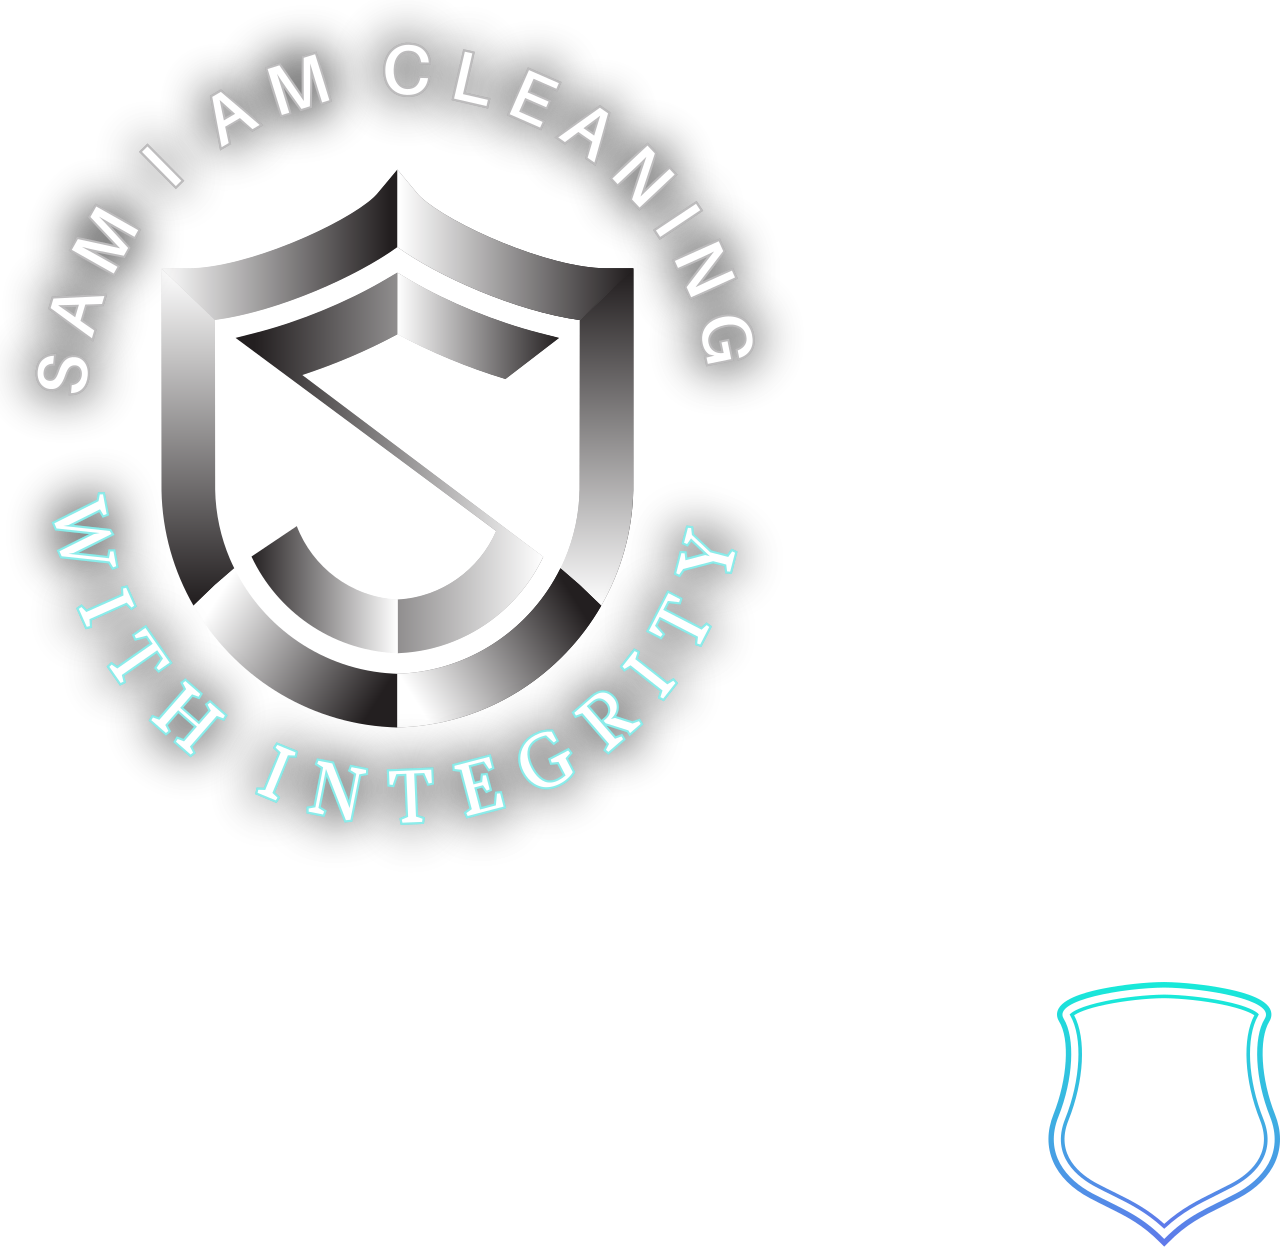 SAM I AM CLEANING 's web page